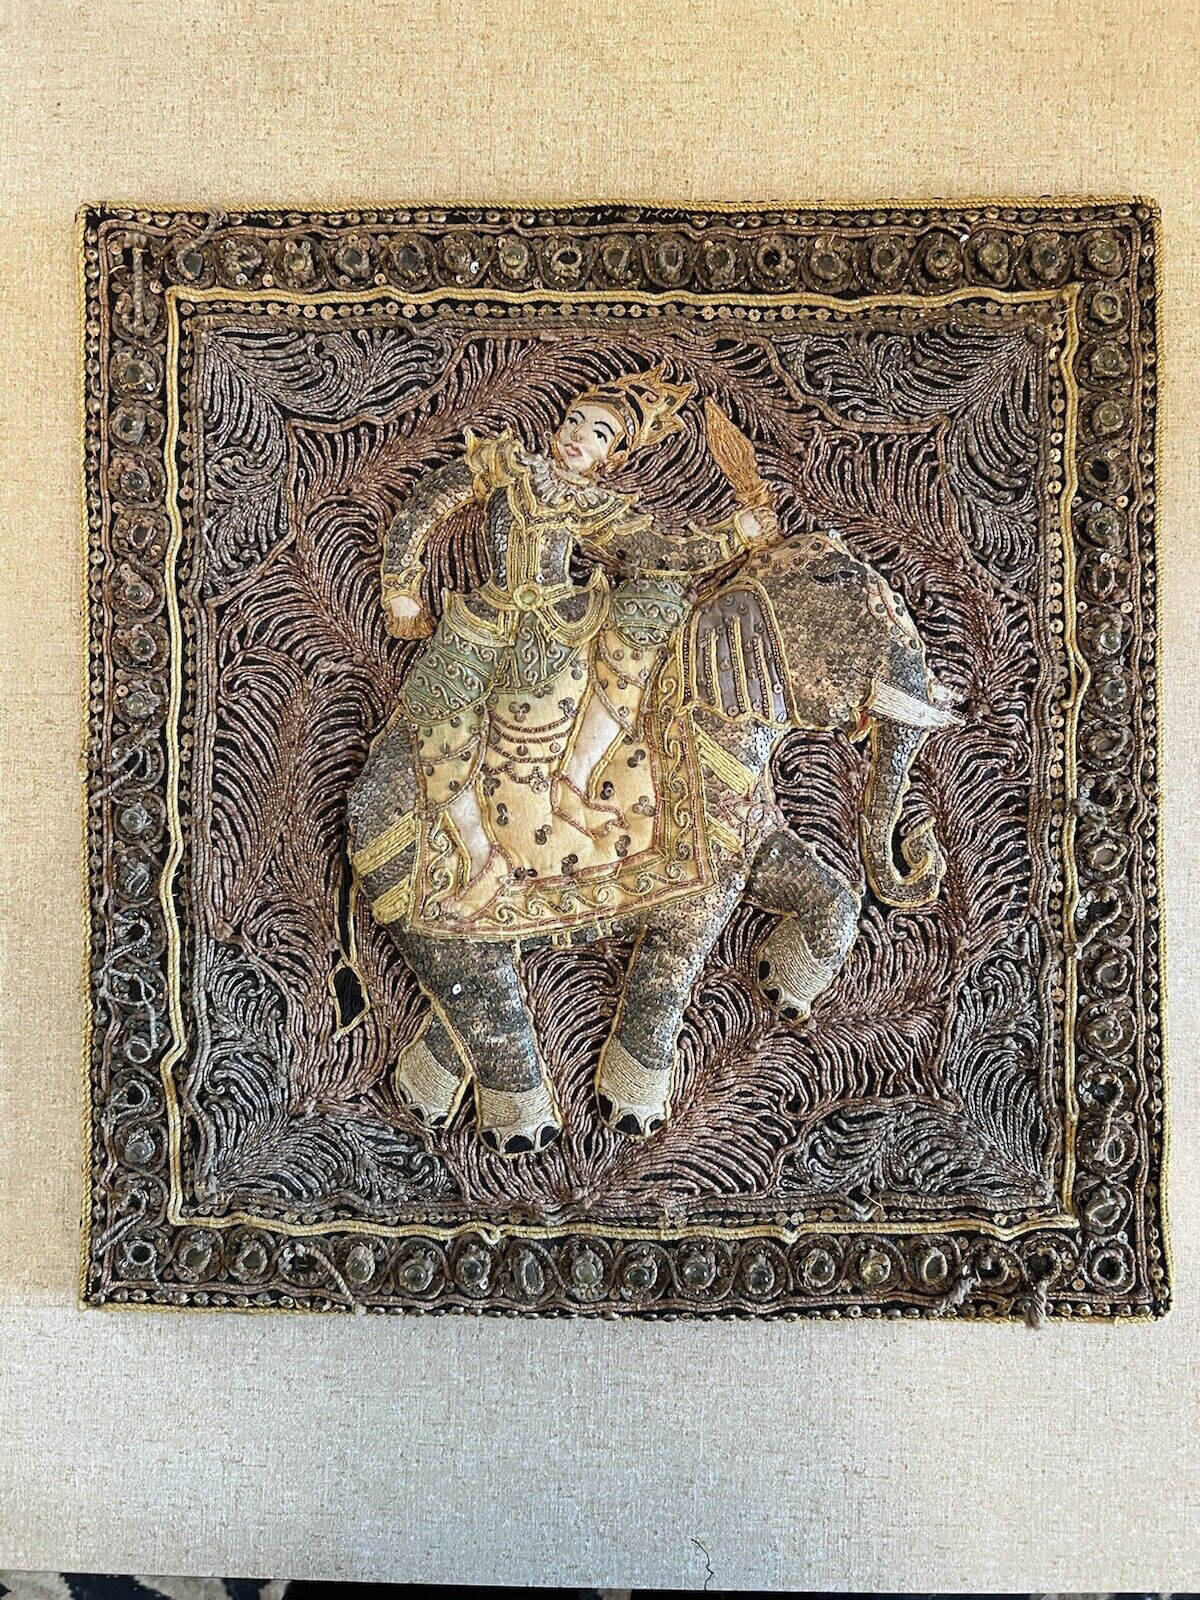 Vintage Thai Oriental Wall Art with Elephant (purchased from art dealer)